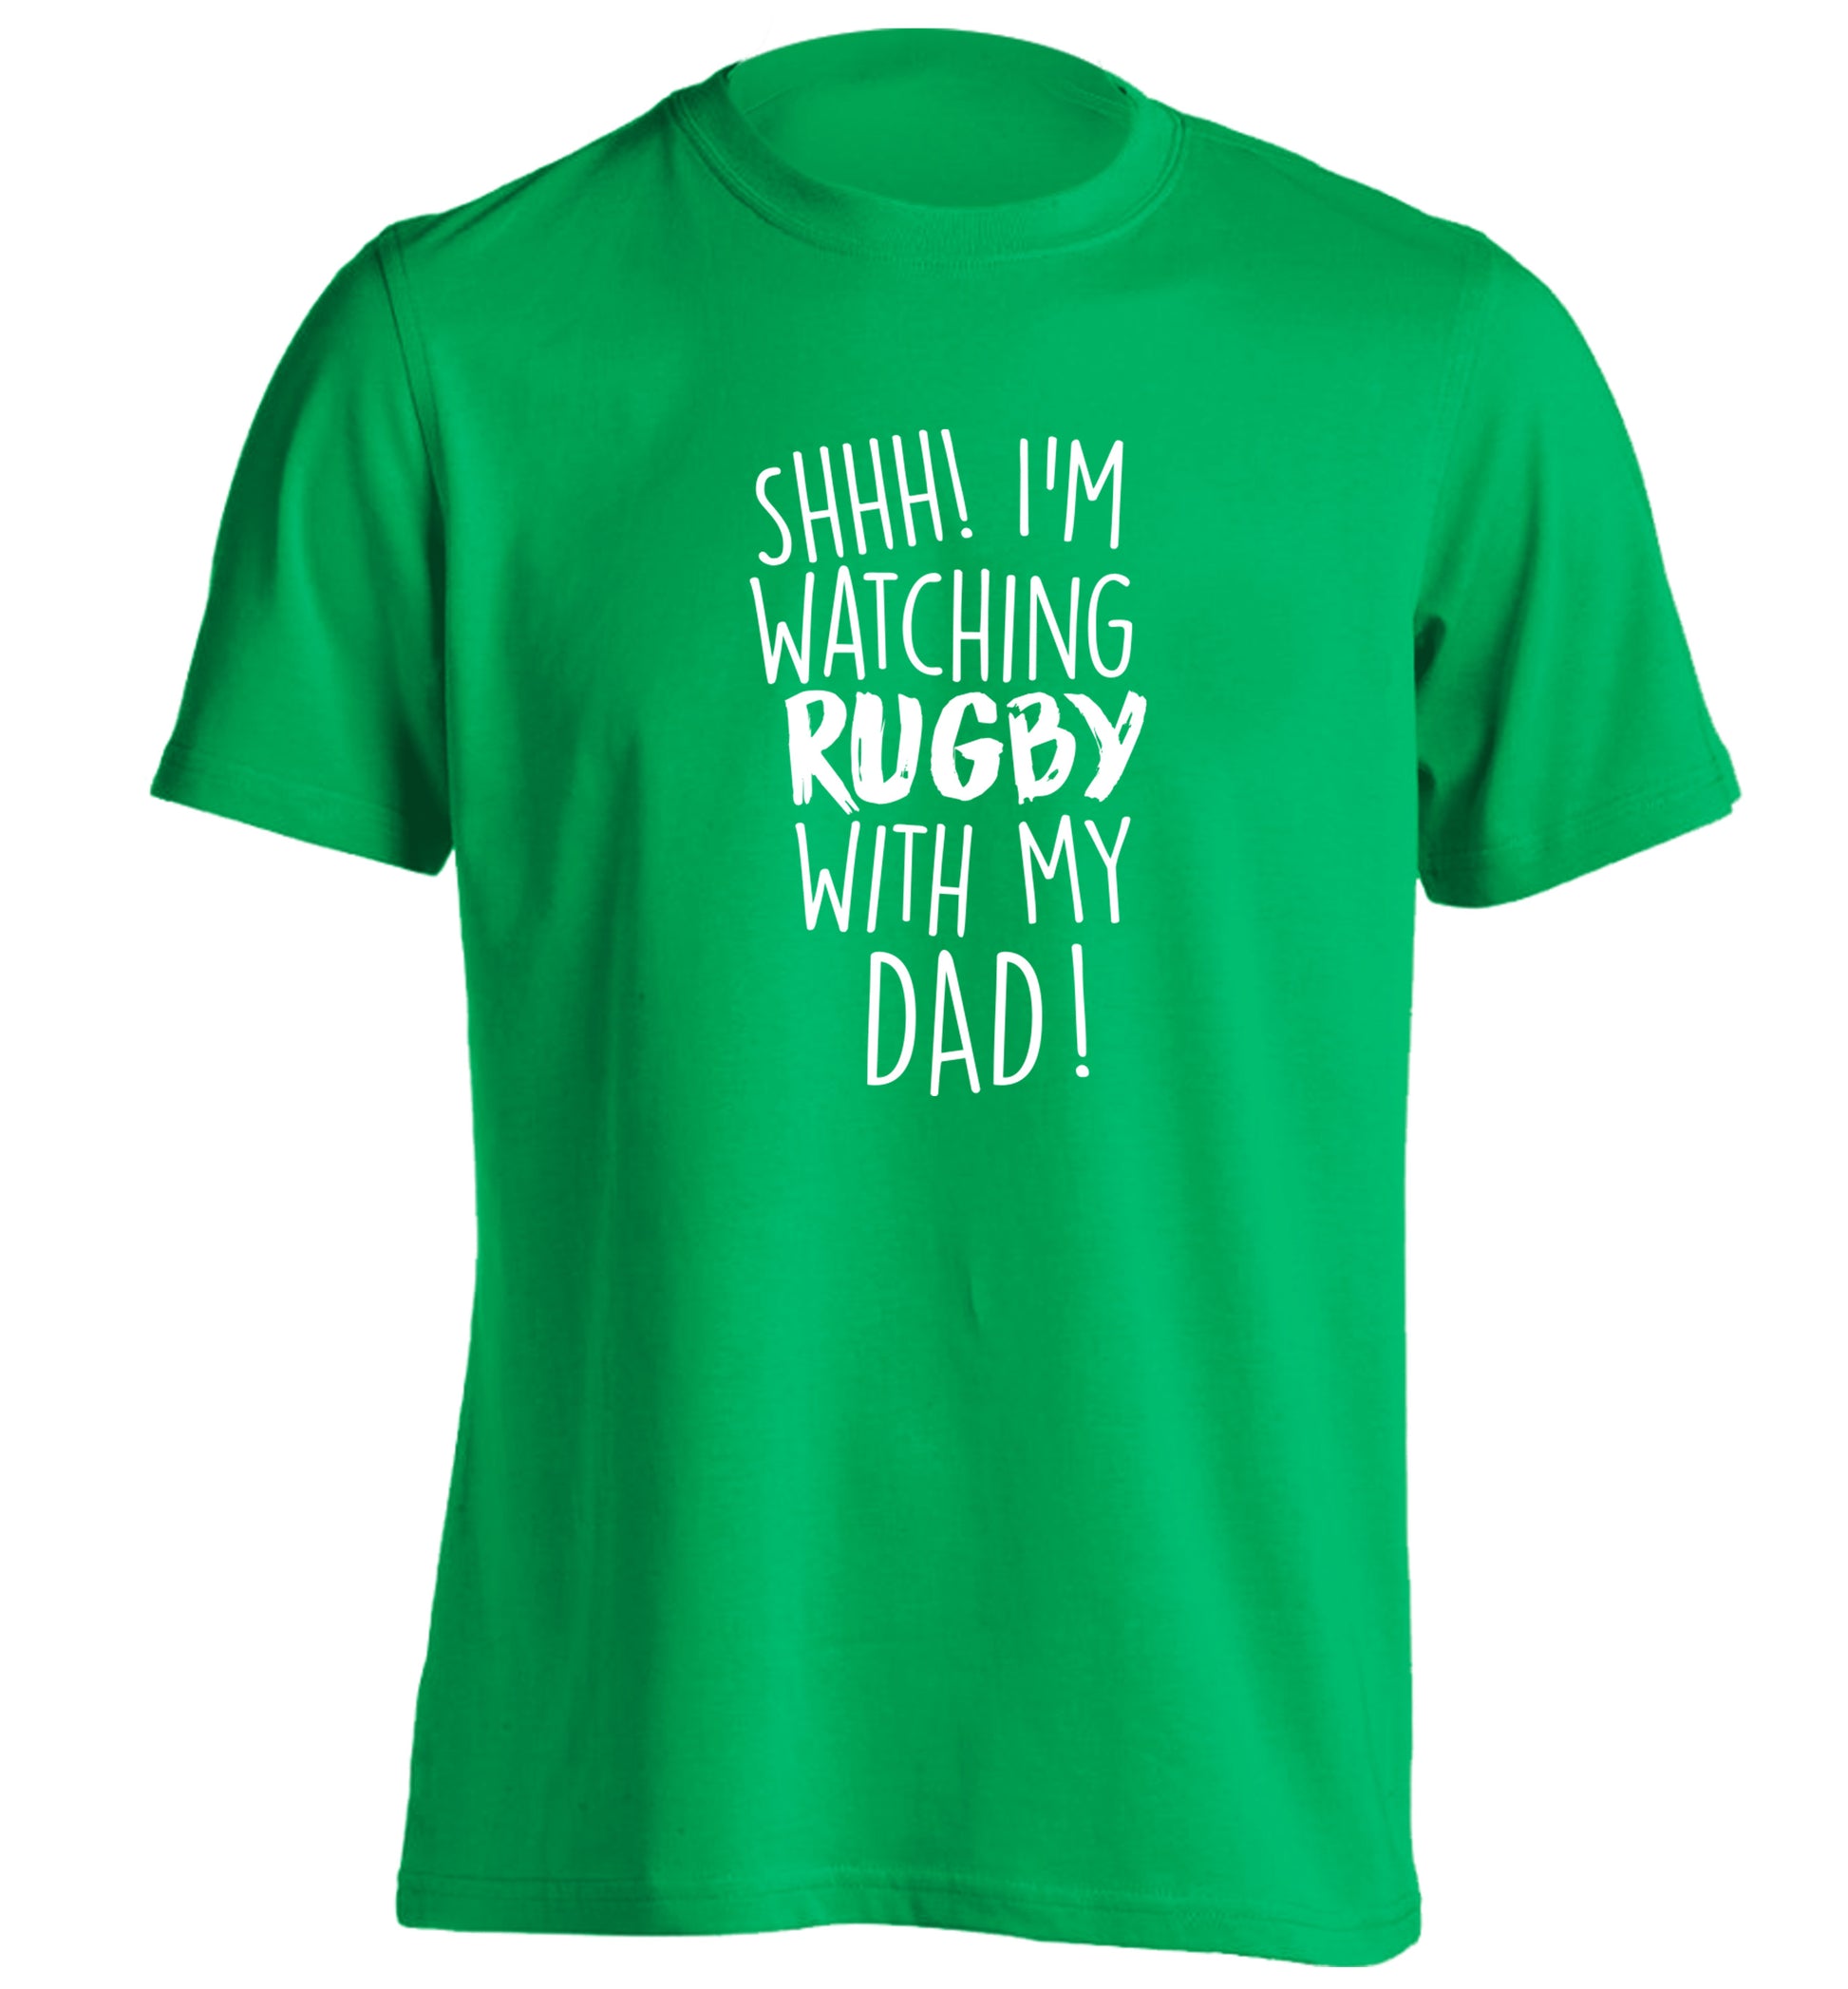 Shh... I'm watching rugby with my dad adults unisex green Tshirt 2XL